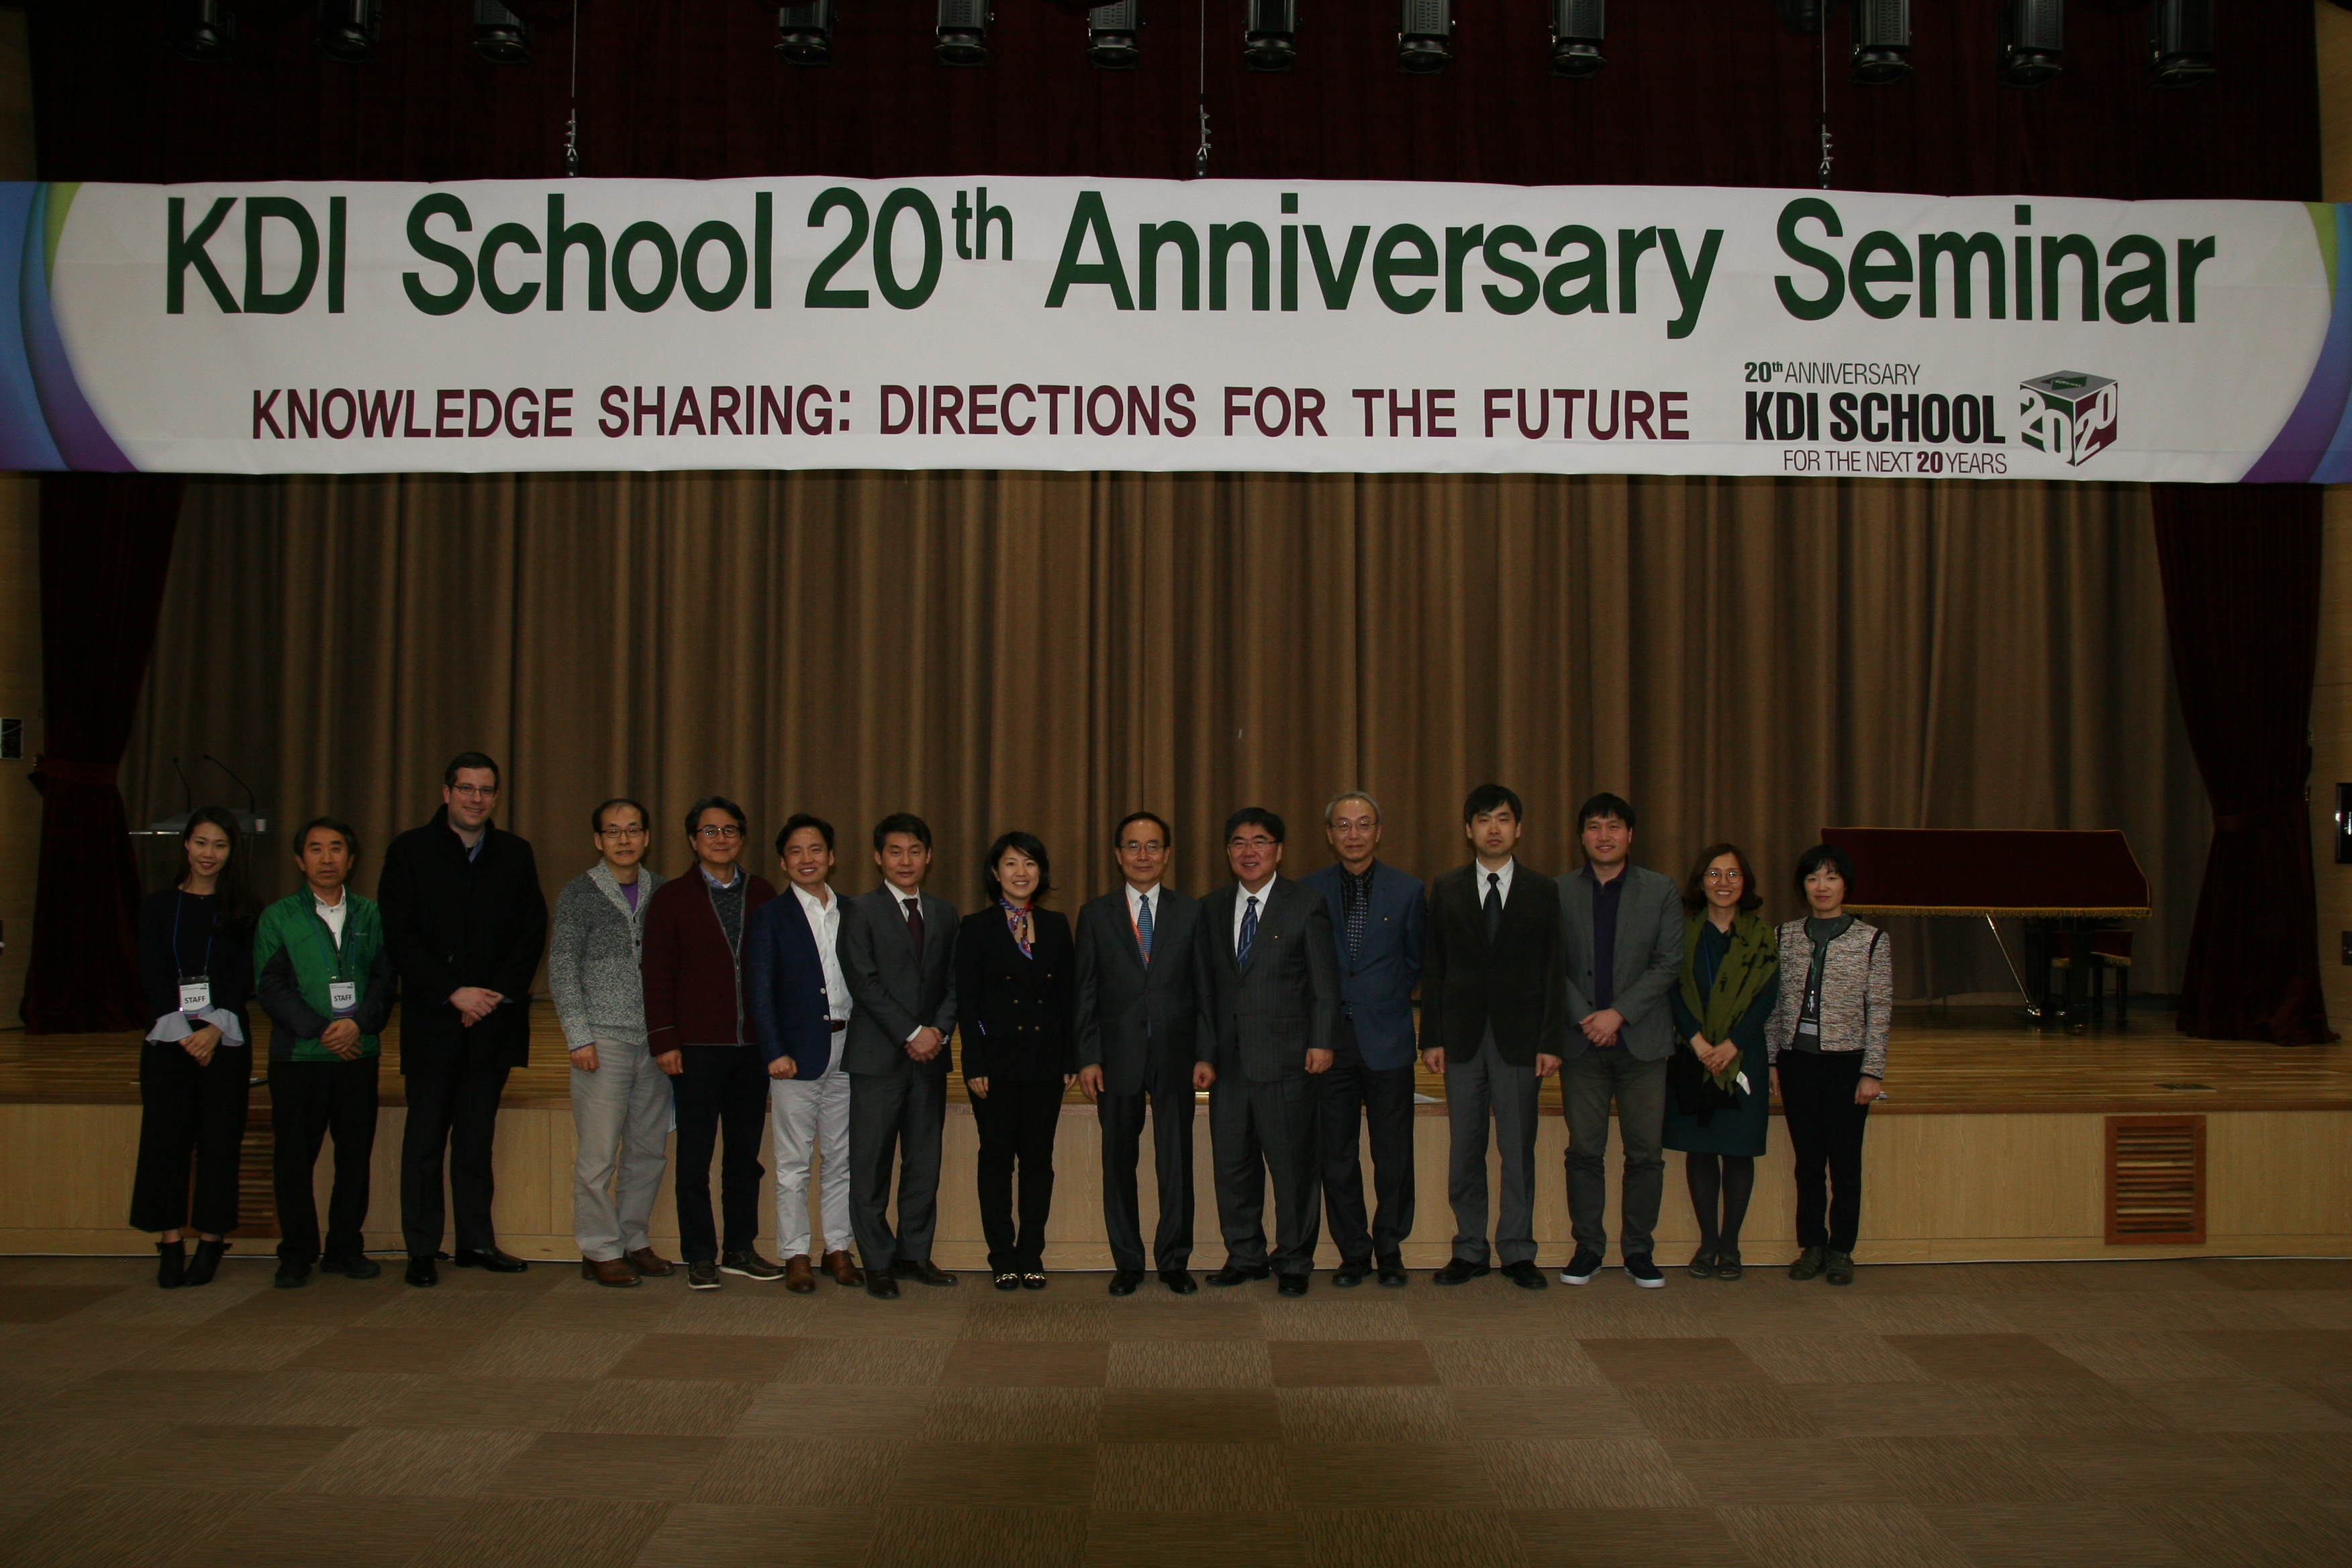 KDI School 20th anniversary special lecture series has kicked off